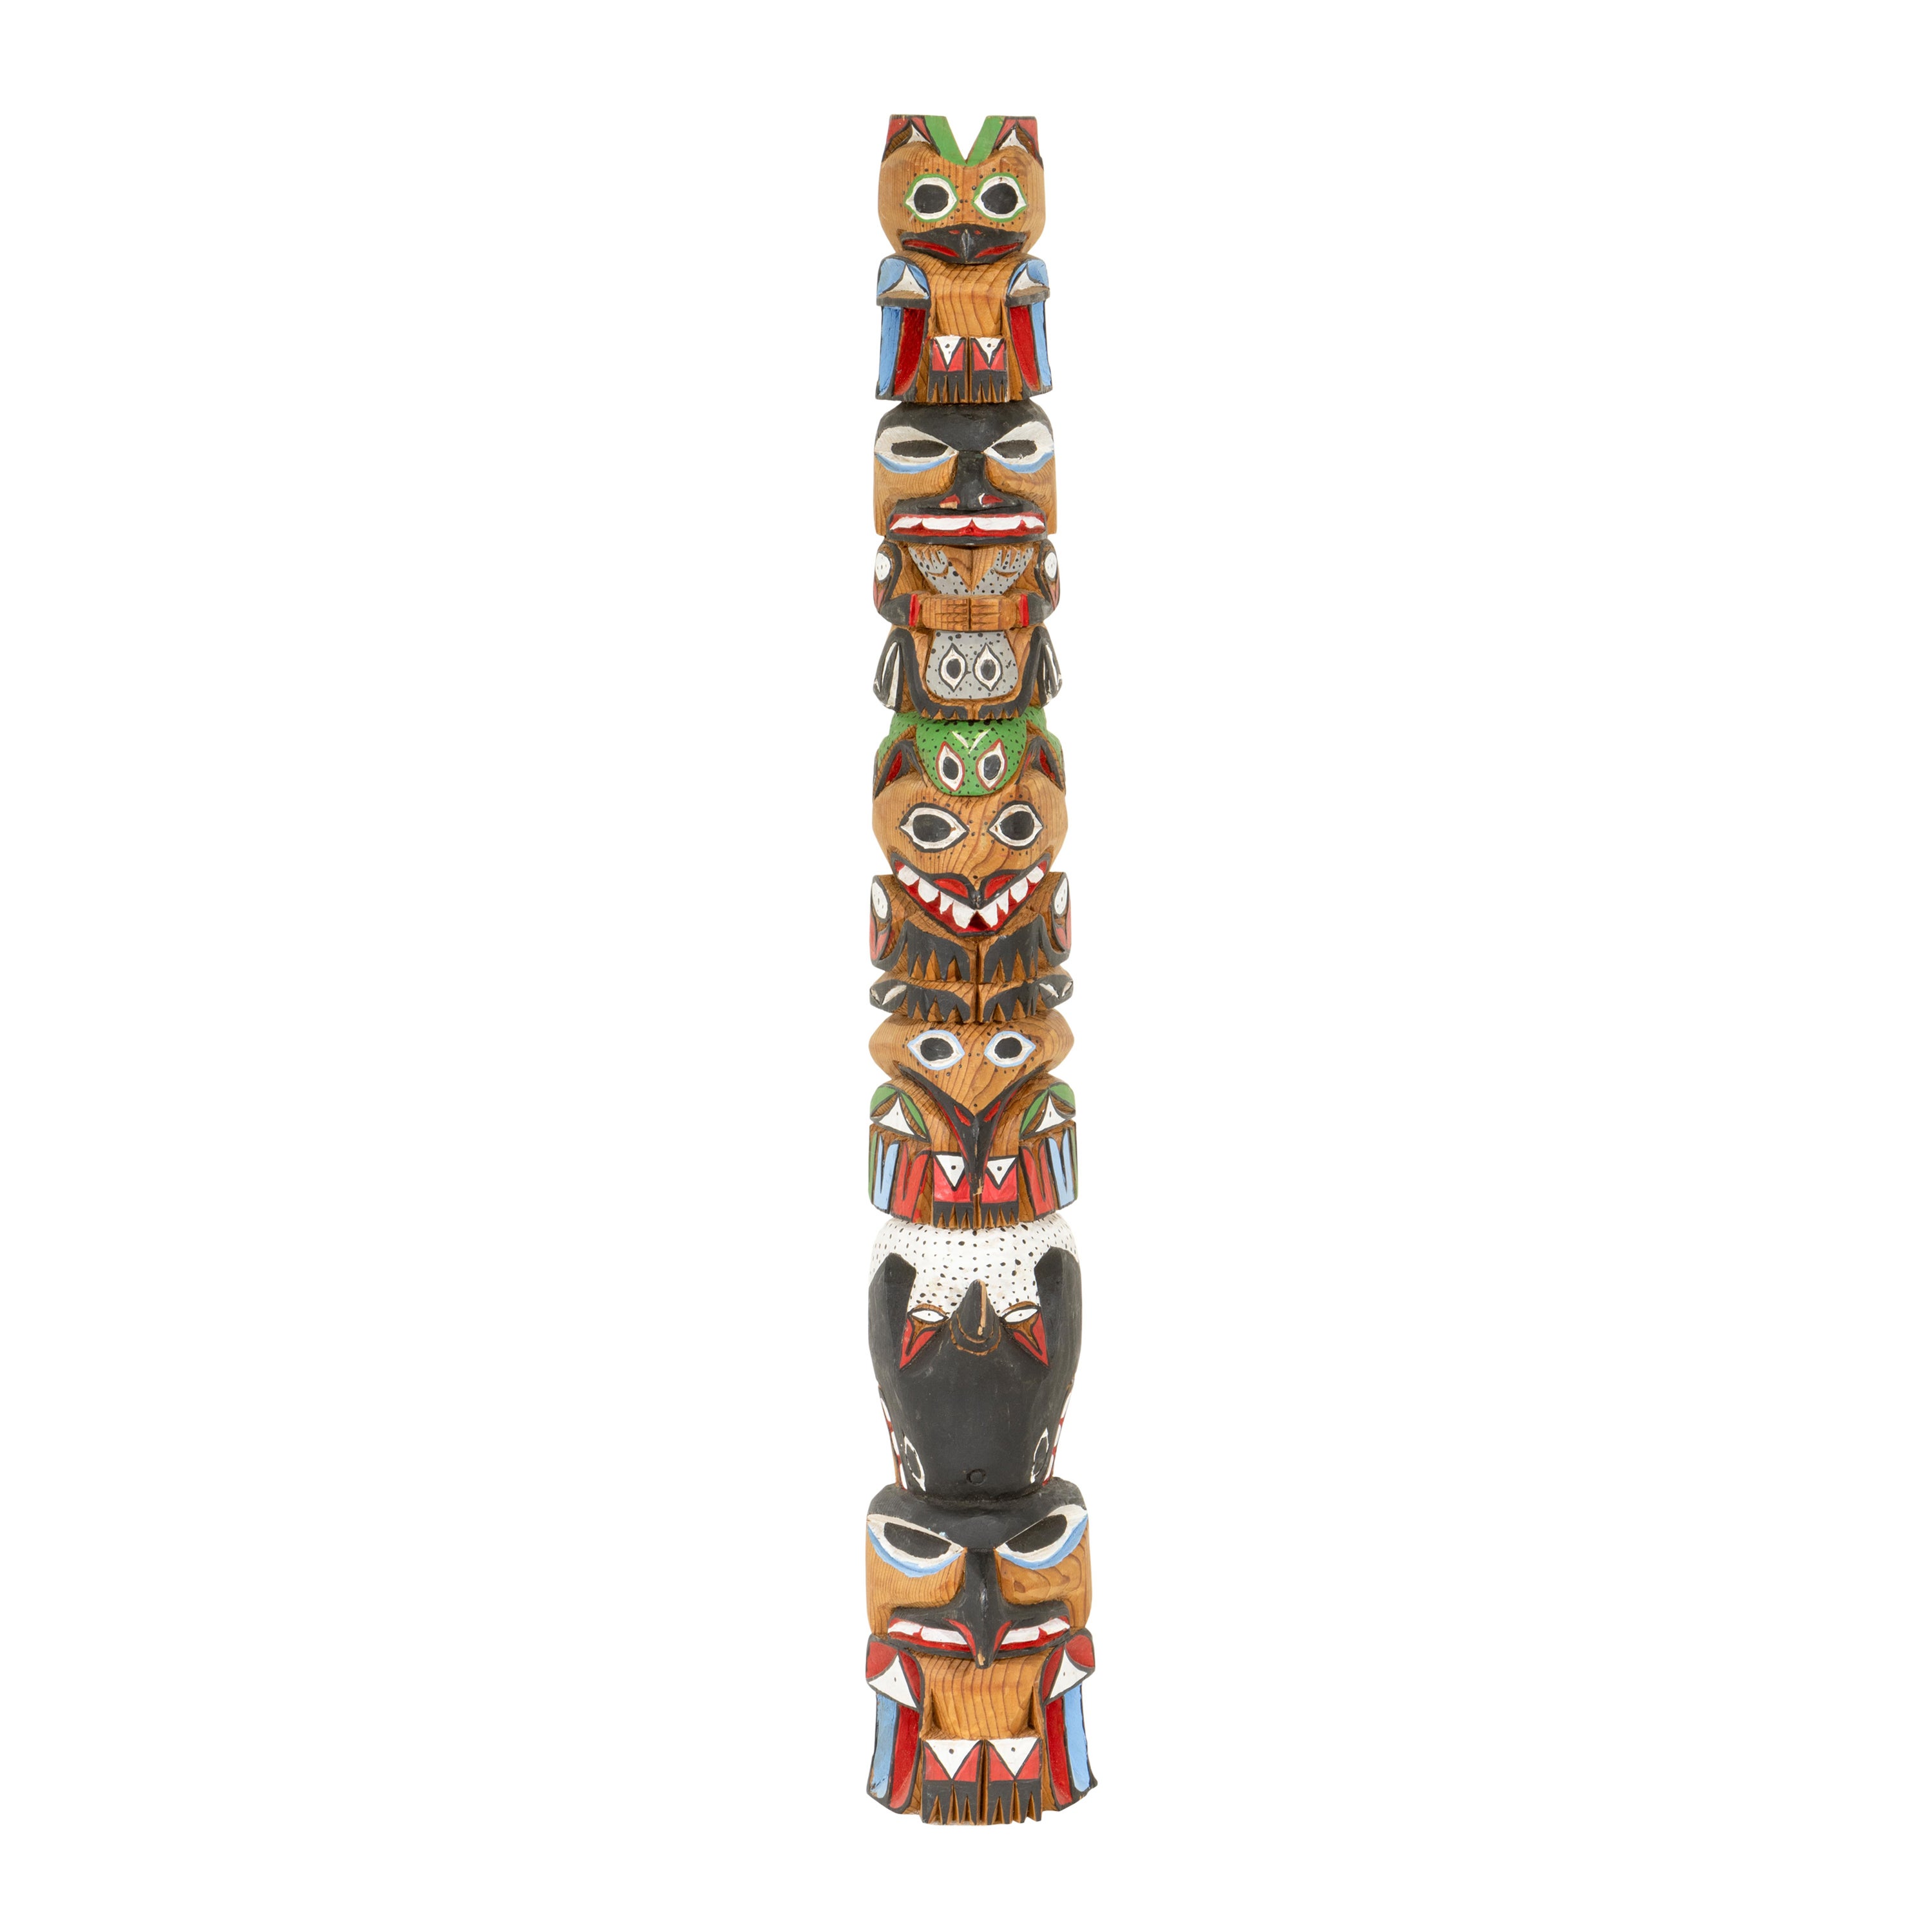 Native Nootka Totem by Rick Williams, 2 Foot